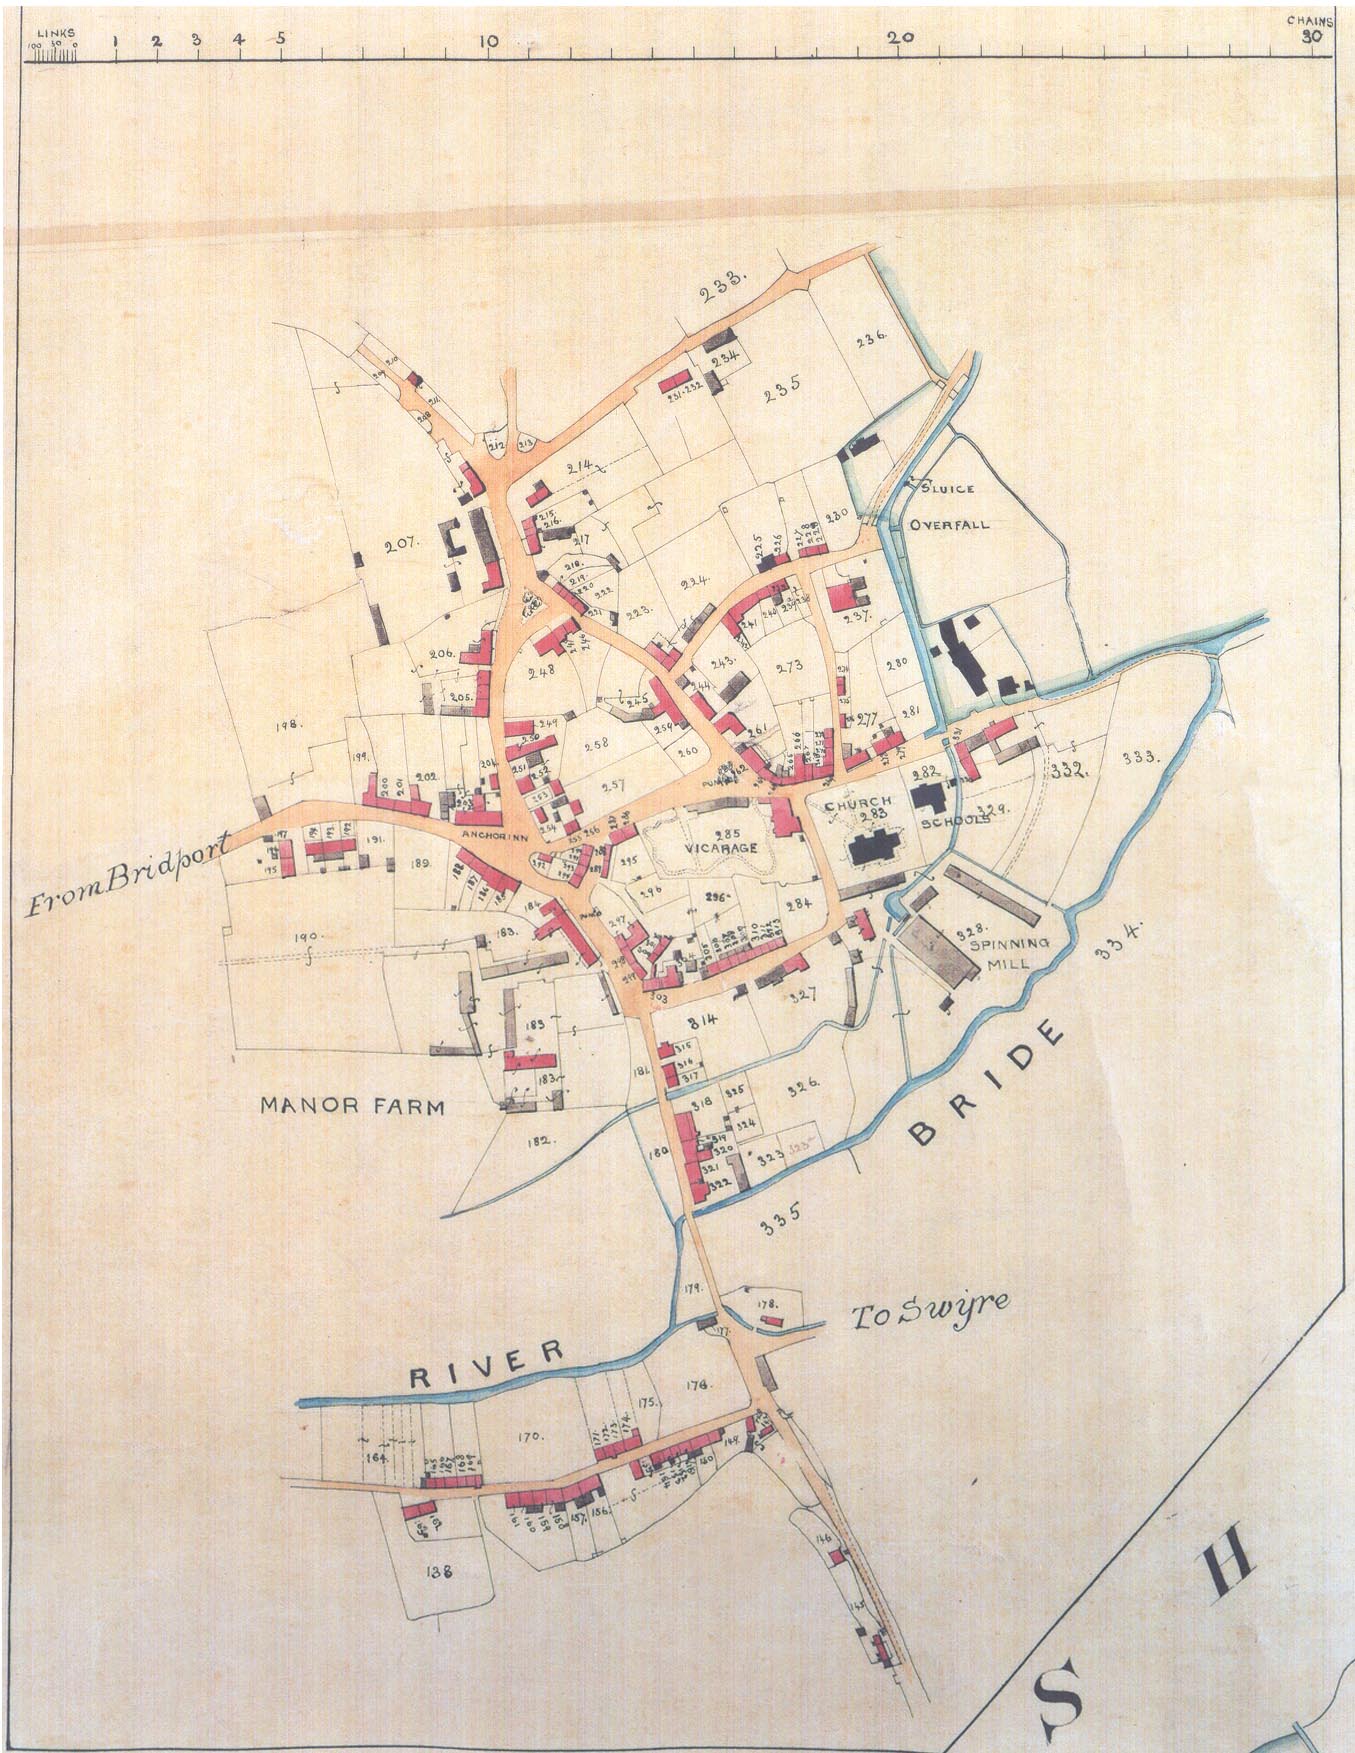 Old map from Bridport Museum - date unknown